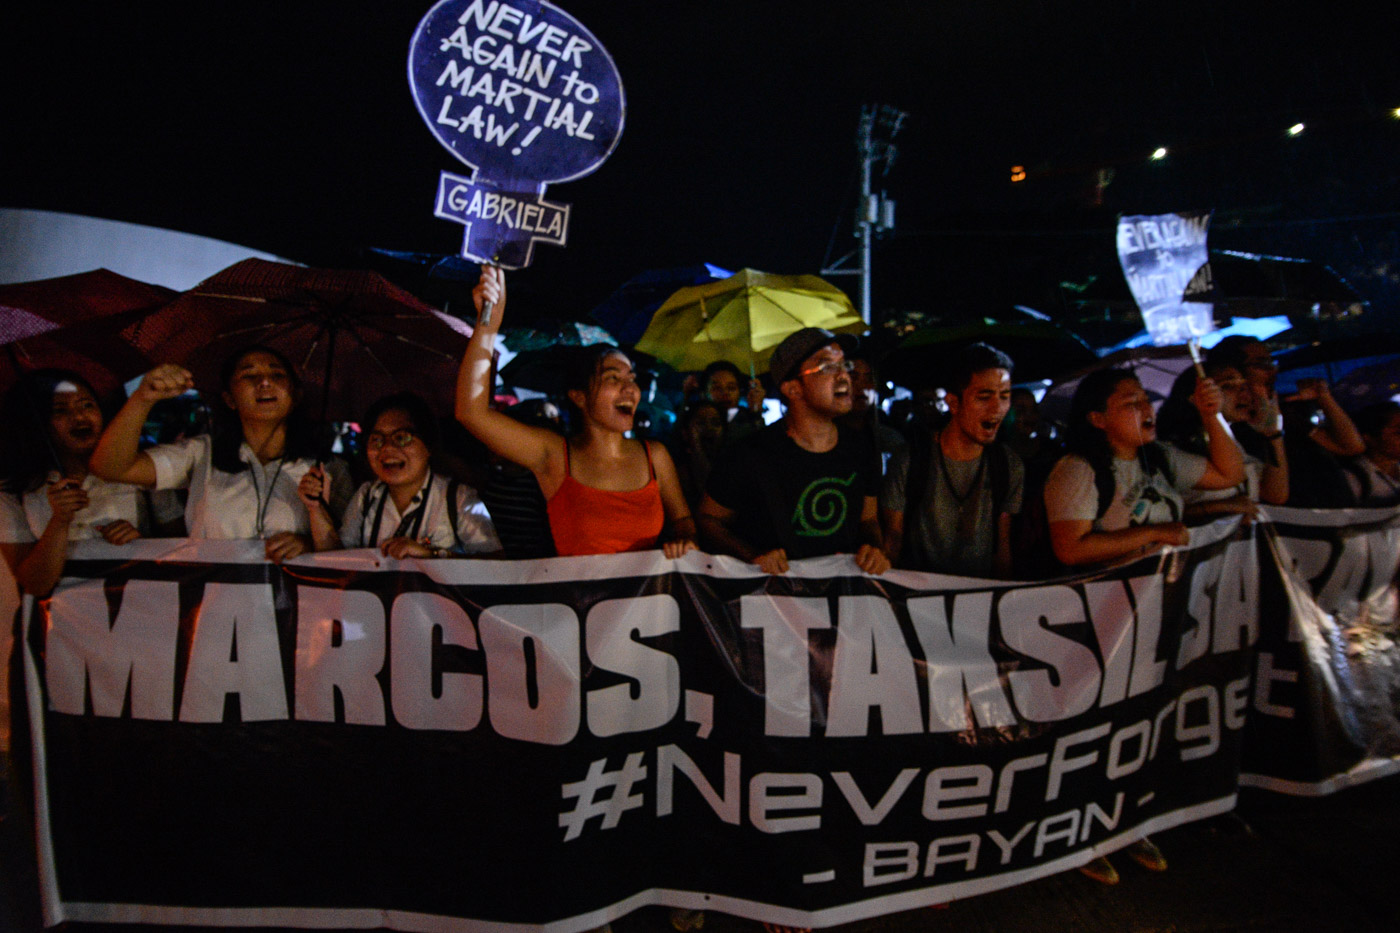 KATIPUNAN TAKEOVER. Rain fails to dampen the spirits of students from the University of the Philippines, Ateneo De Manila University, and Miriam College as thousands walk out of their classes to protest along Katipunan Avenue in Quezon City the burial of former president Marcos at the Libingan ng mga Bayani on November 18, 2016. Photo by LeAnne Jazul/Rappler  